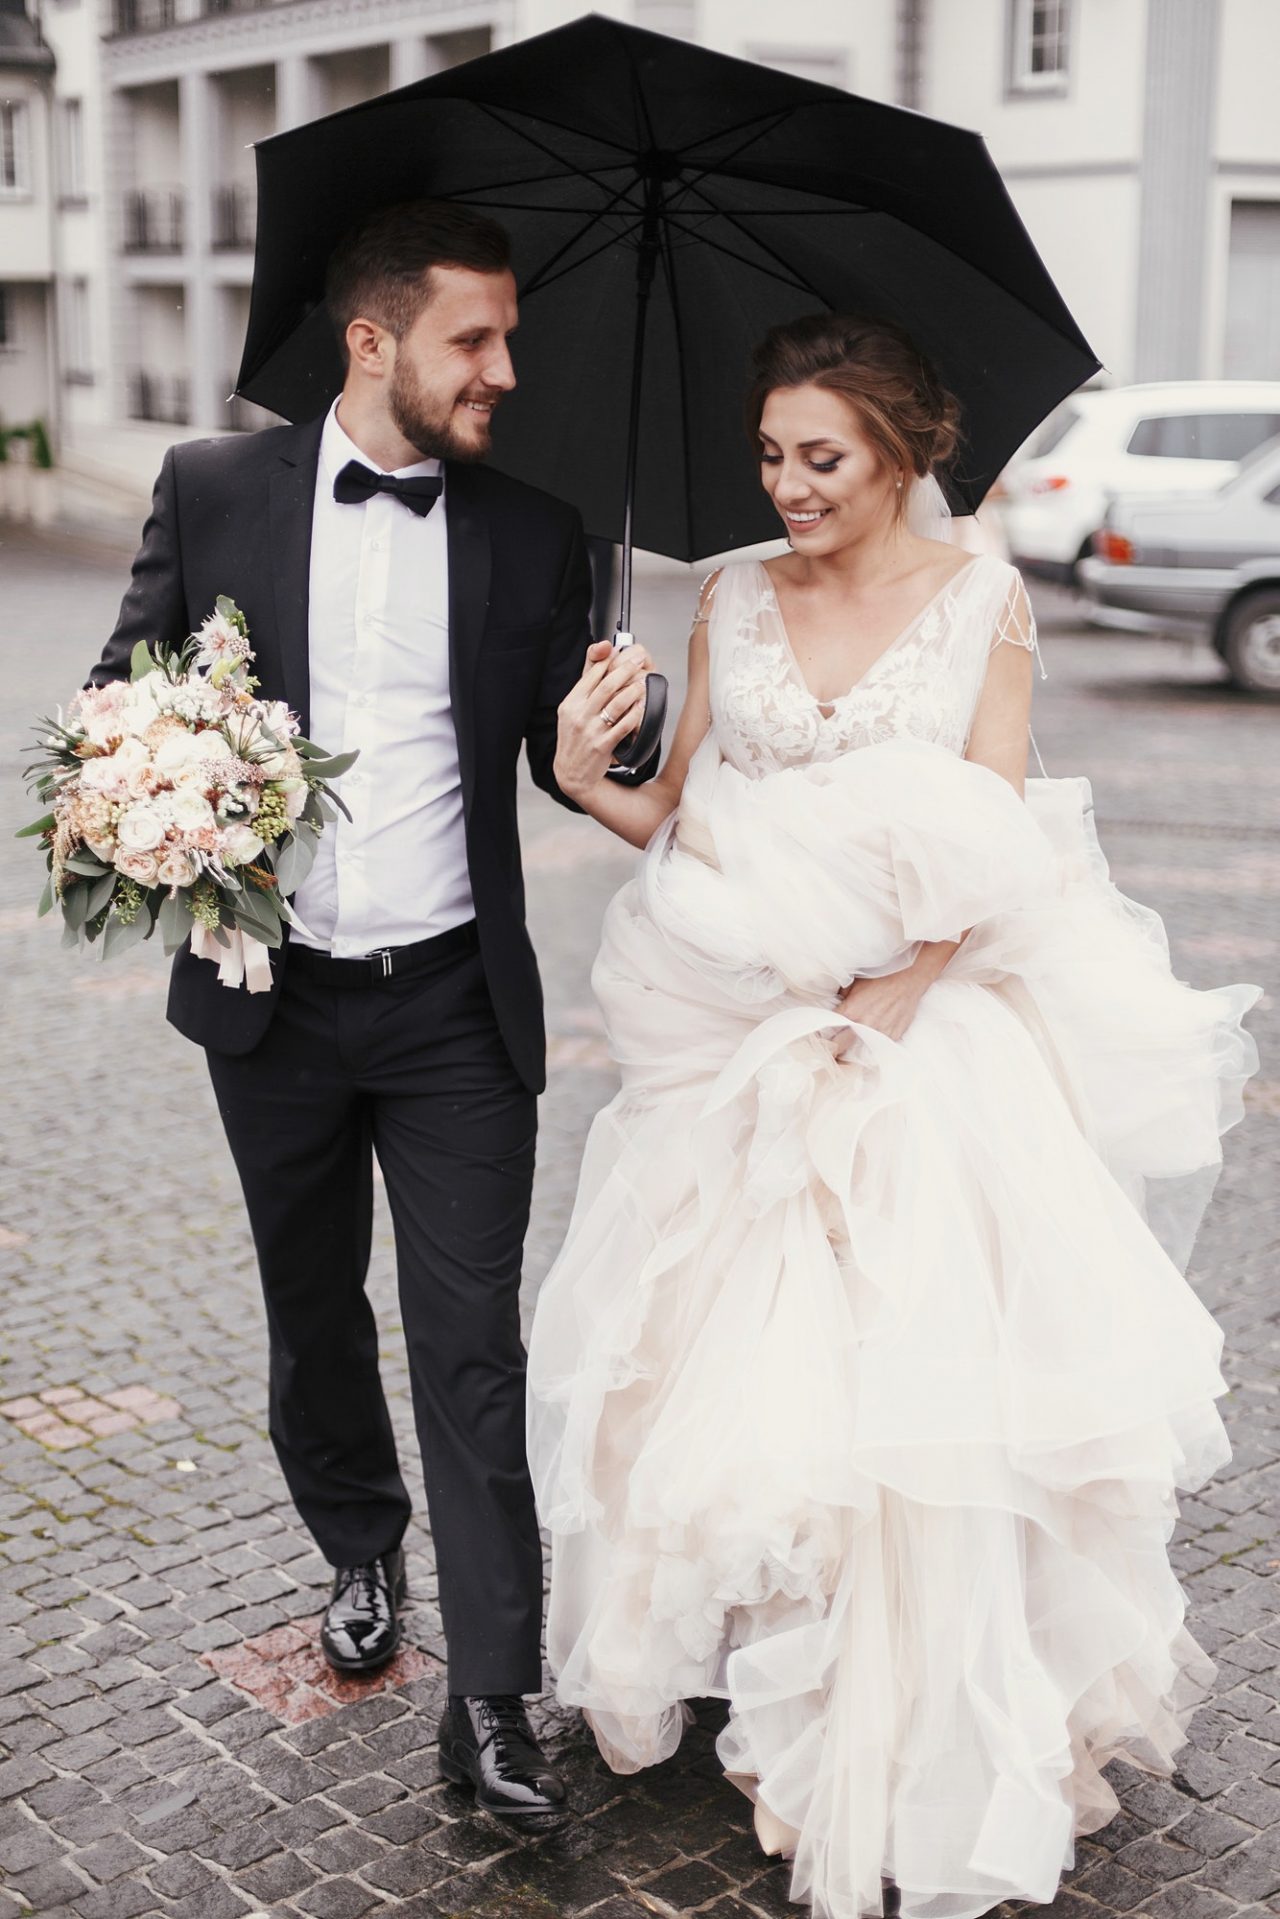 Gorgeous bride and stylish groom walking under umbrella in rainy street and smiling